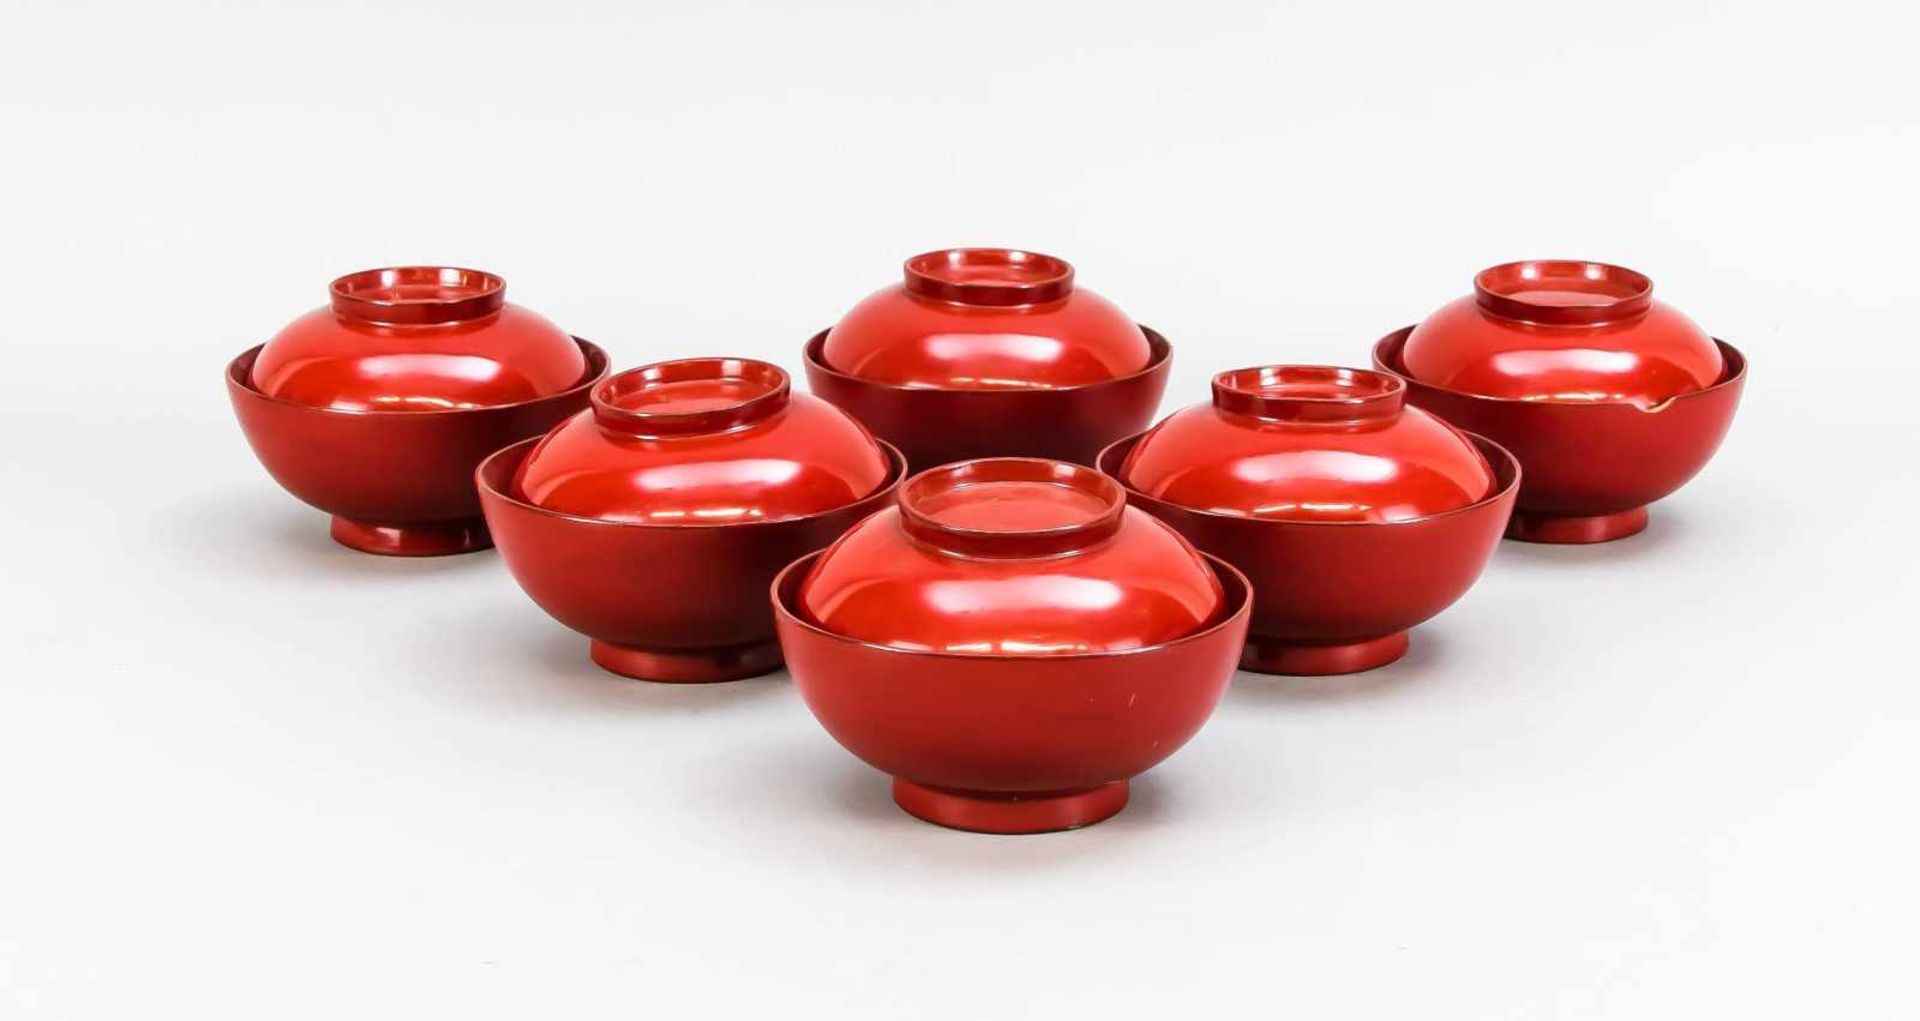 6 Negoro Lacquered Lidded Bowls, Japan, probably 19th C. Red and black Urushi lacquer on a